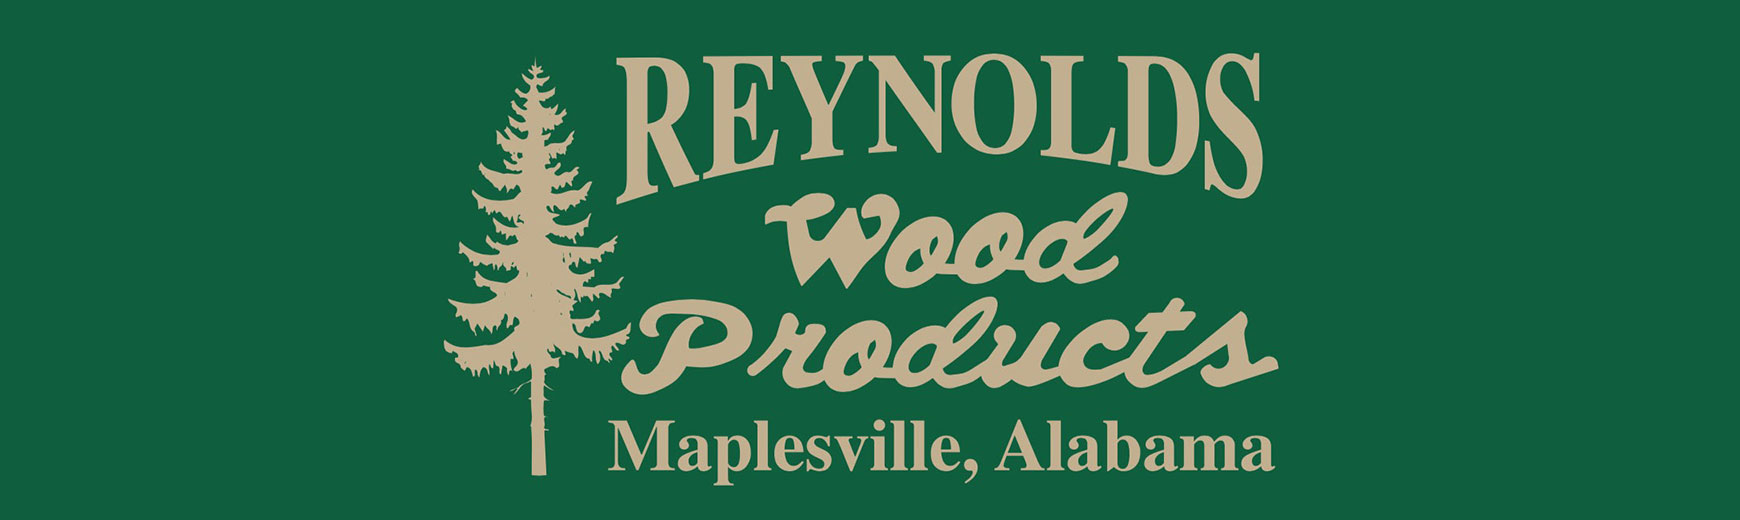 Reynolds Wood Products